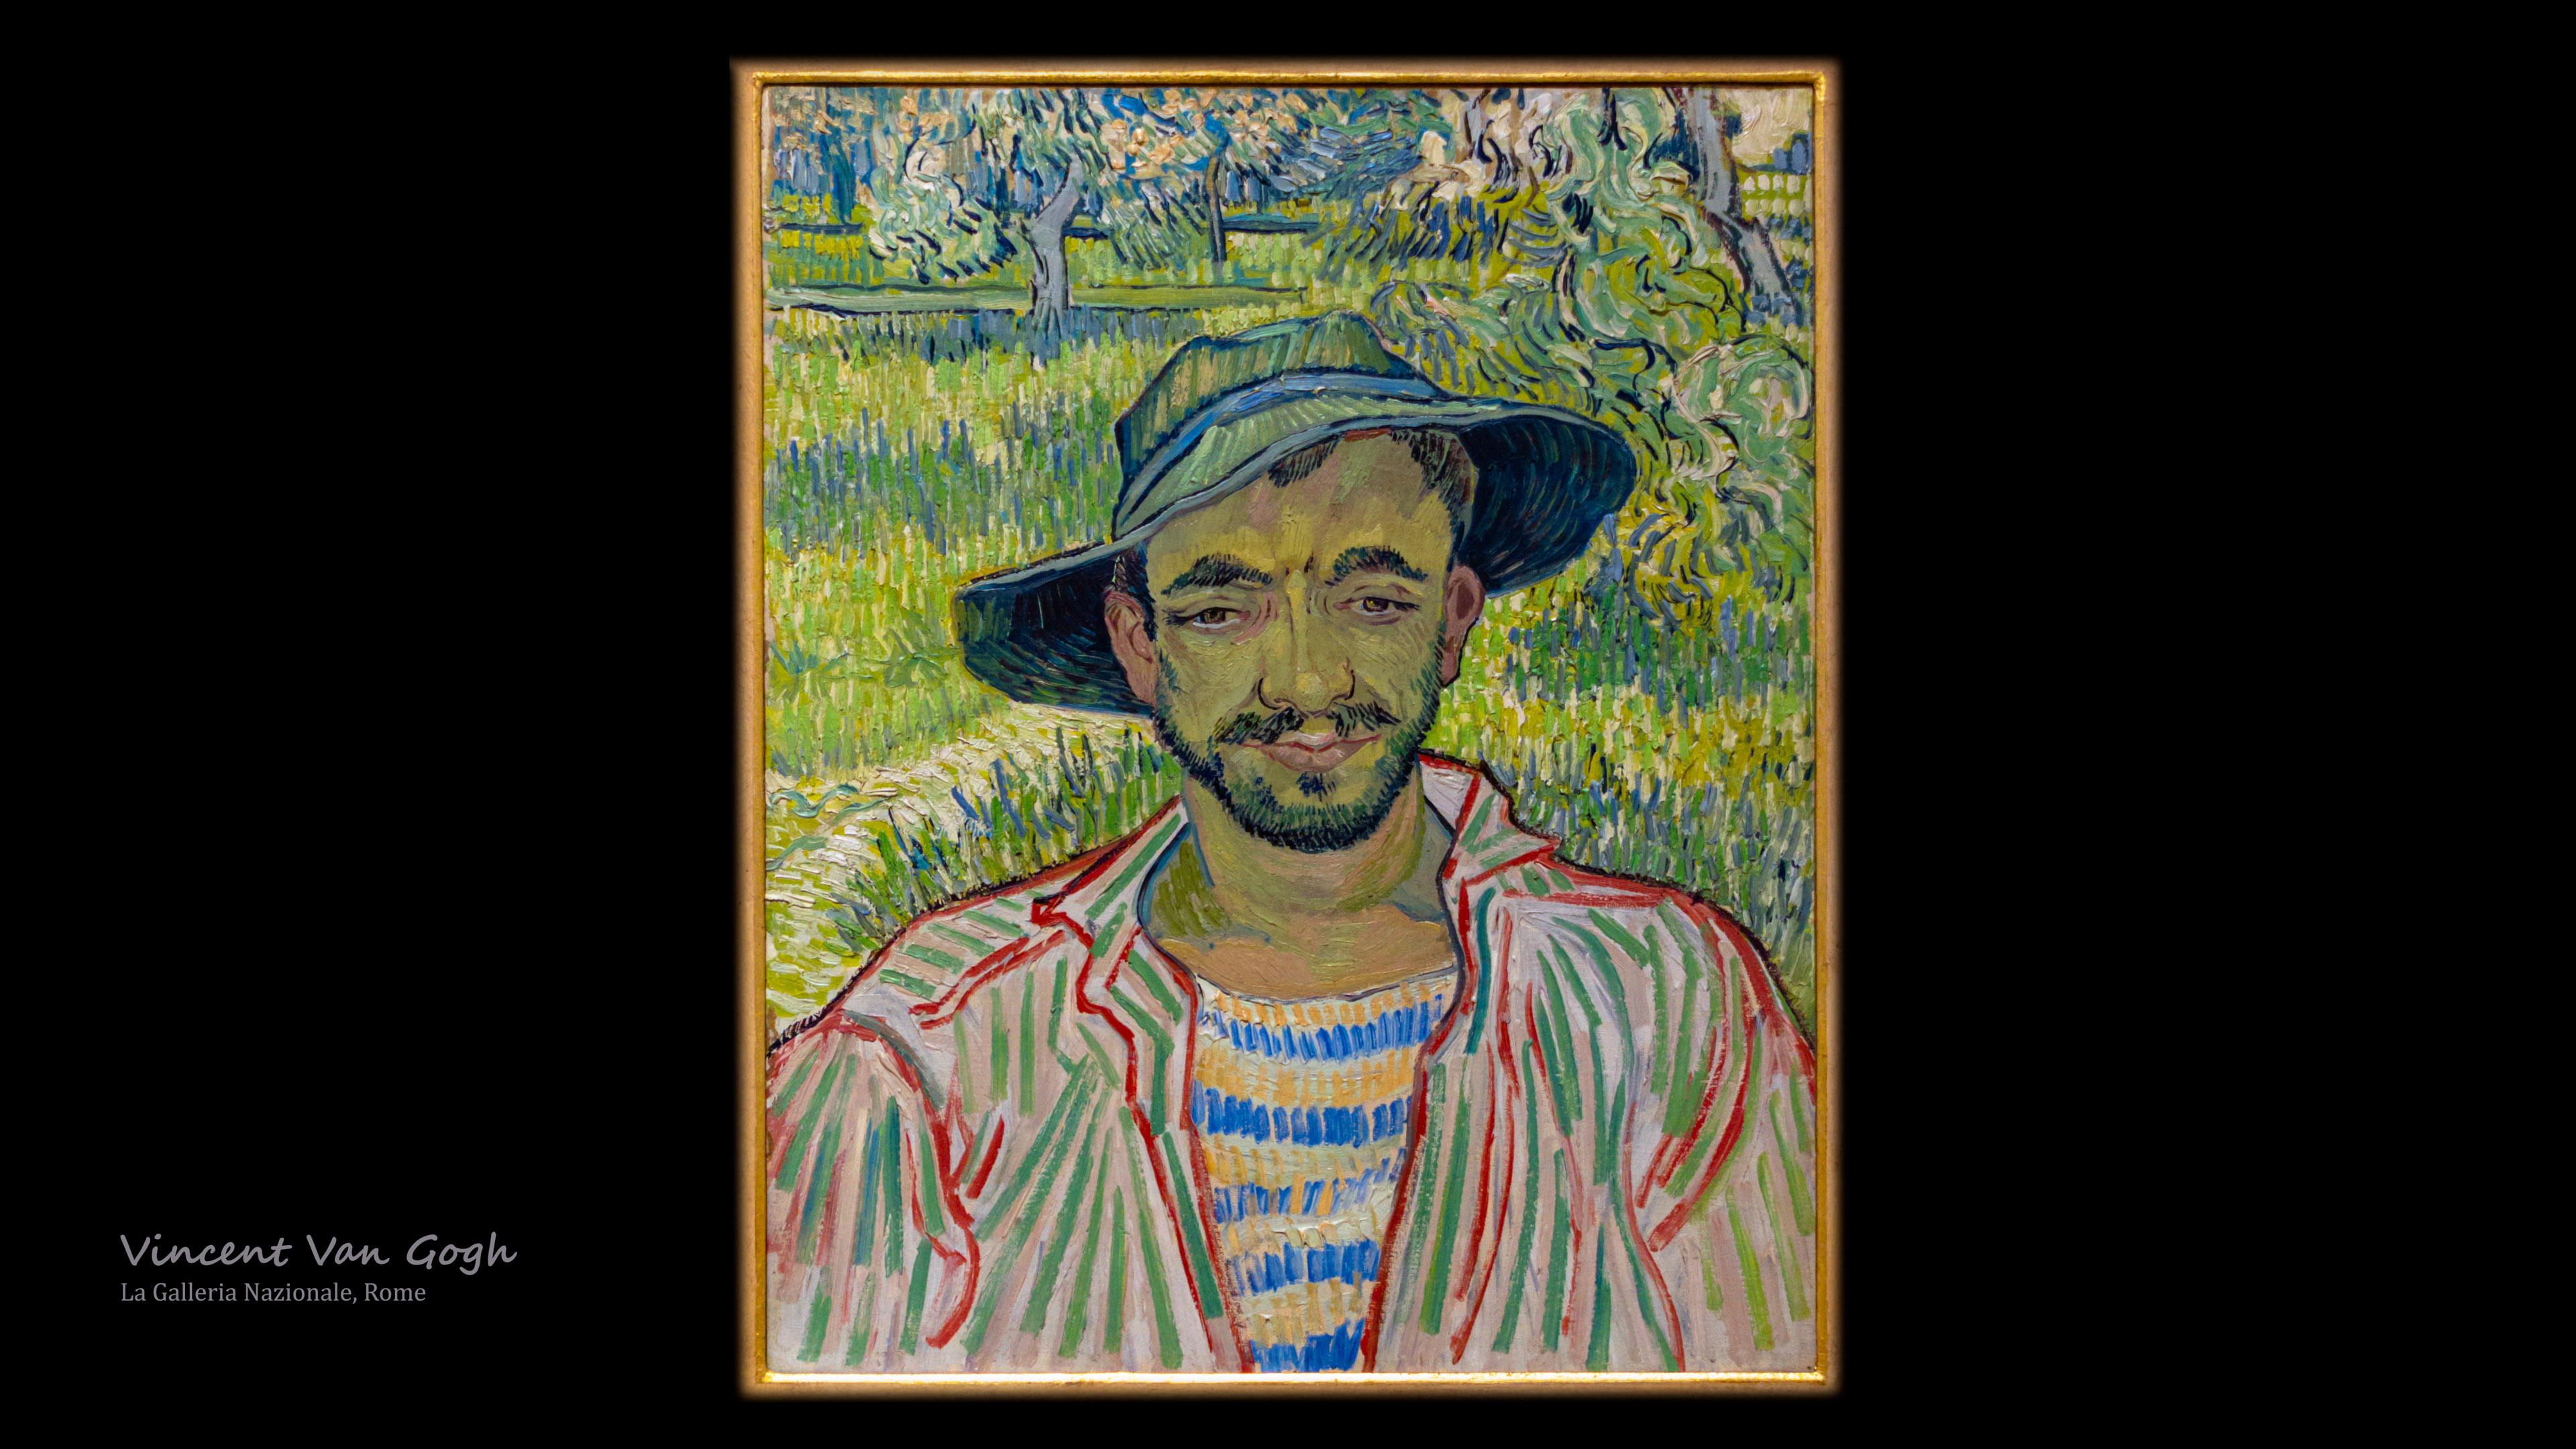 Discover the simplicity and dignity of Portrait of a Young Peasant PC wallpaper, featuring the face of a young man that Van Gogh painted in 1888, using expressive and warm tones.